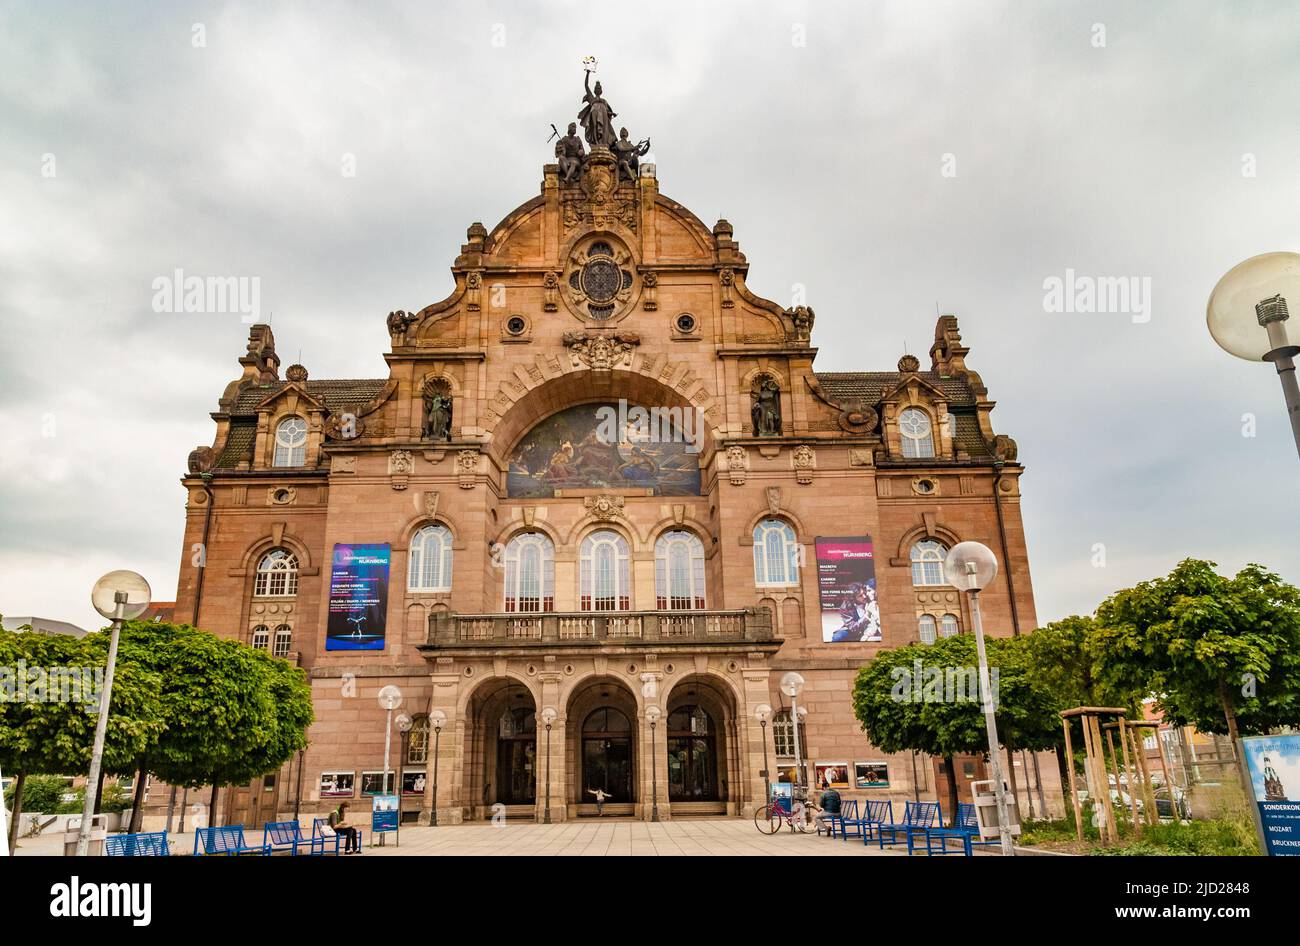 Great view of the main entrance of the opera house (Opernhaus Nürnberg) in Nuremberg, Germany. The historic building was designed by the architect Hei Stock Photo